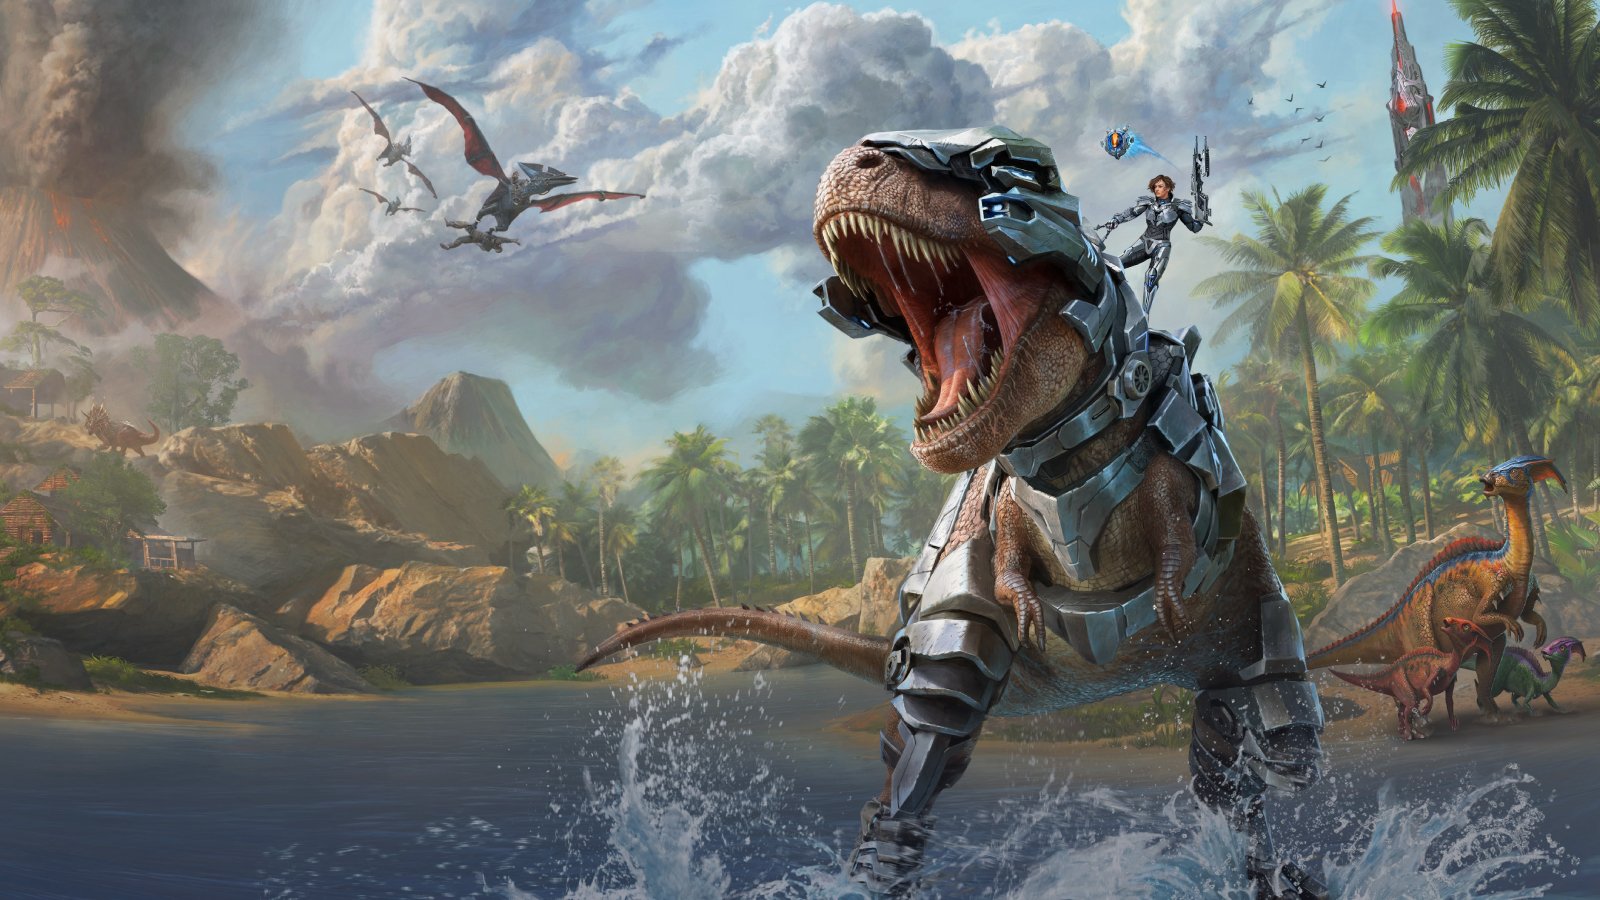 ARK 2 System Requirements